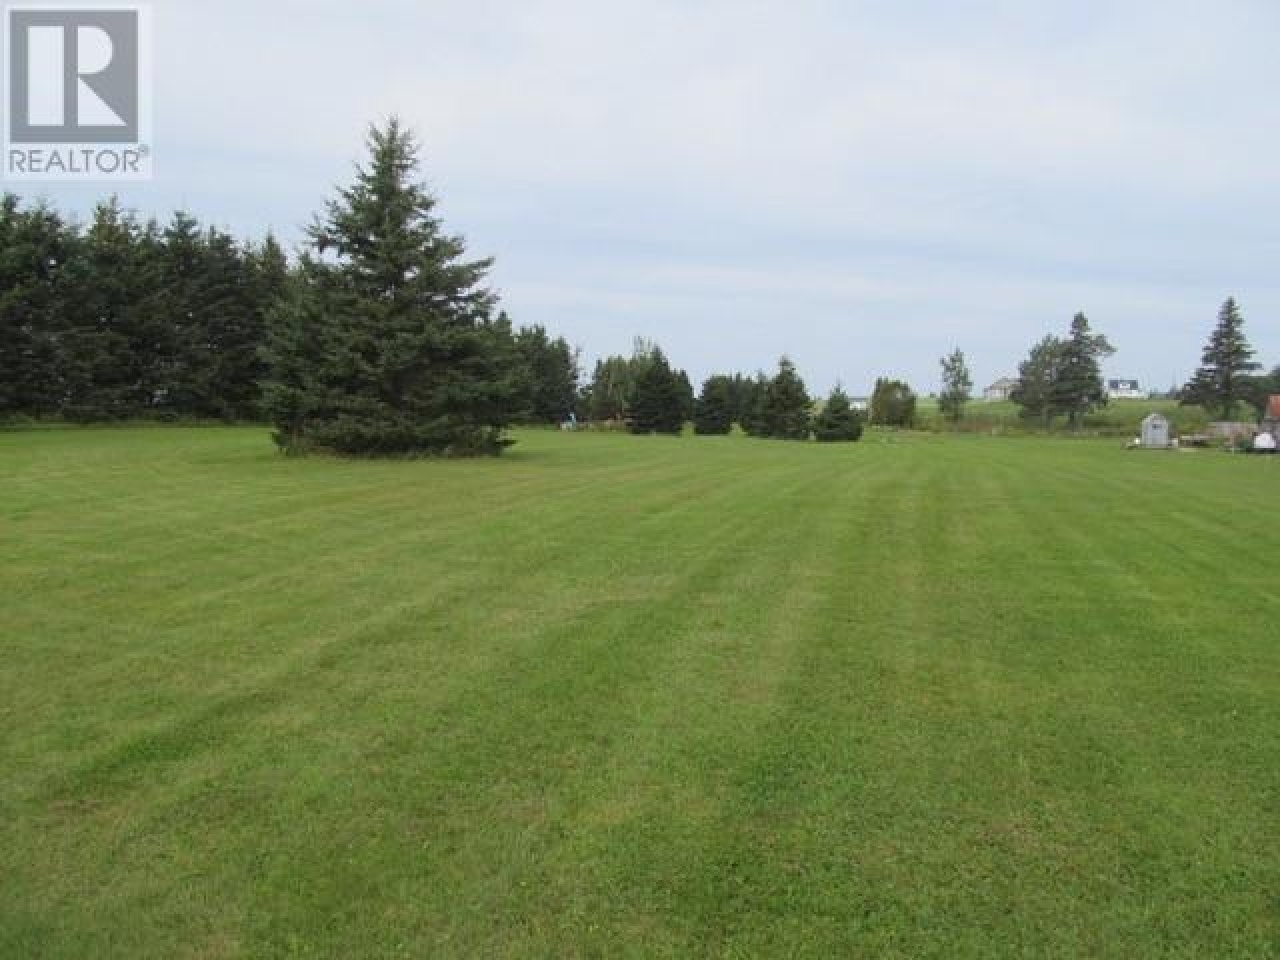 Lot Red PointLot Red Point, Red Point, Prince Edward Island C0A2B0, ,Vacant Land,For Sale,Lot Red Point,202318946